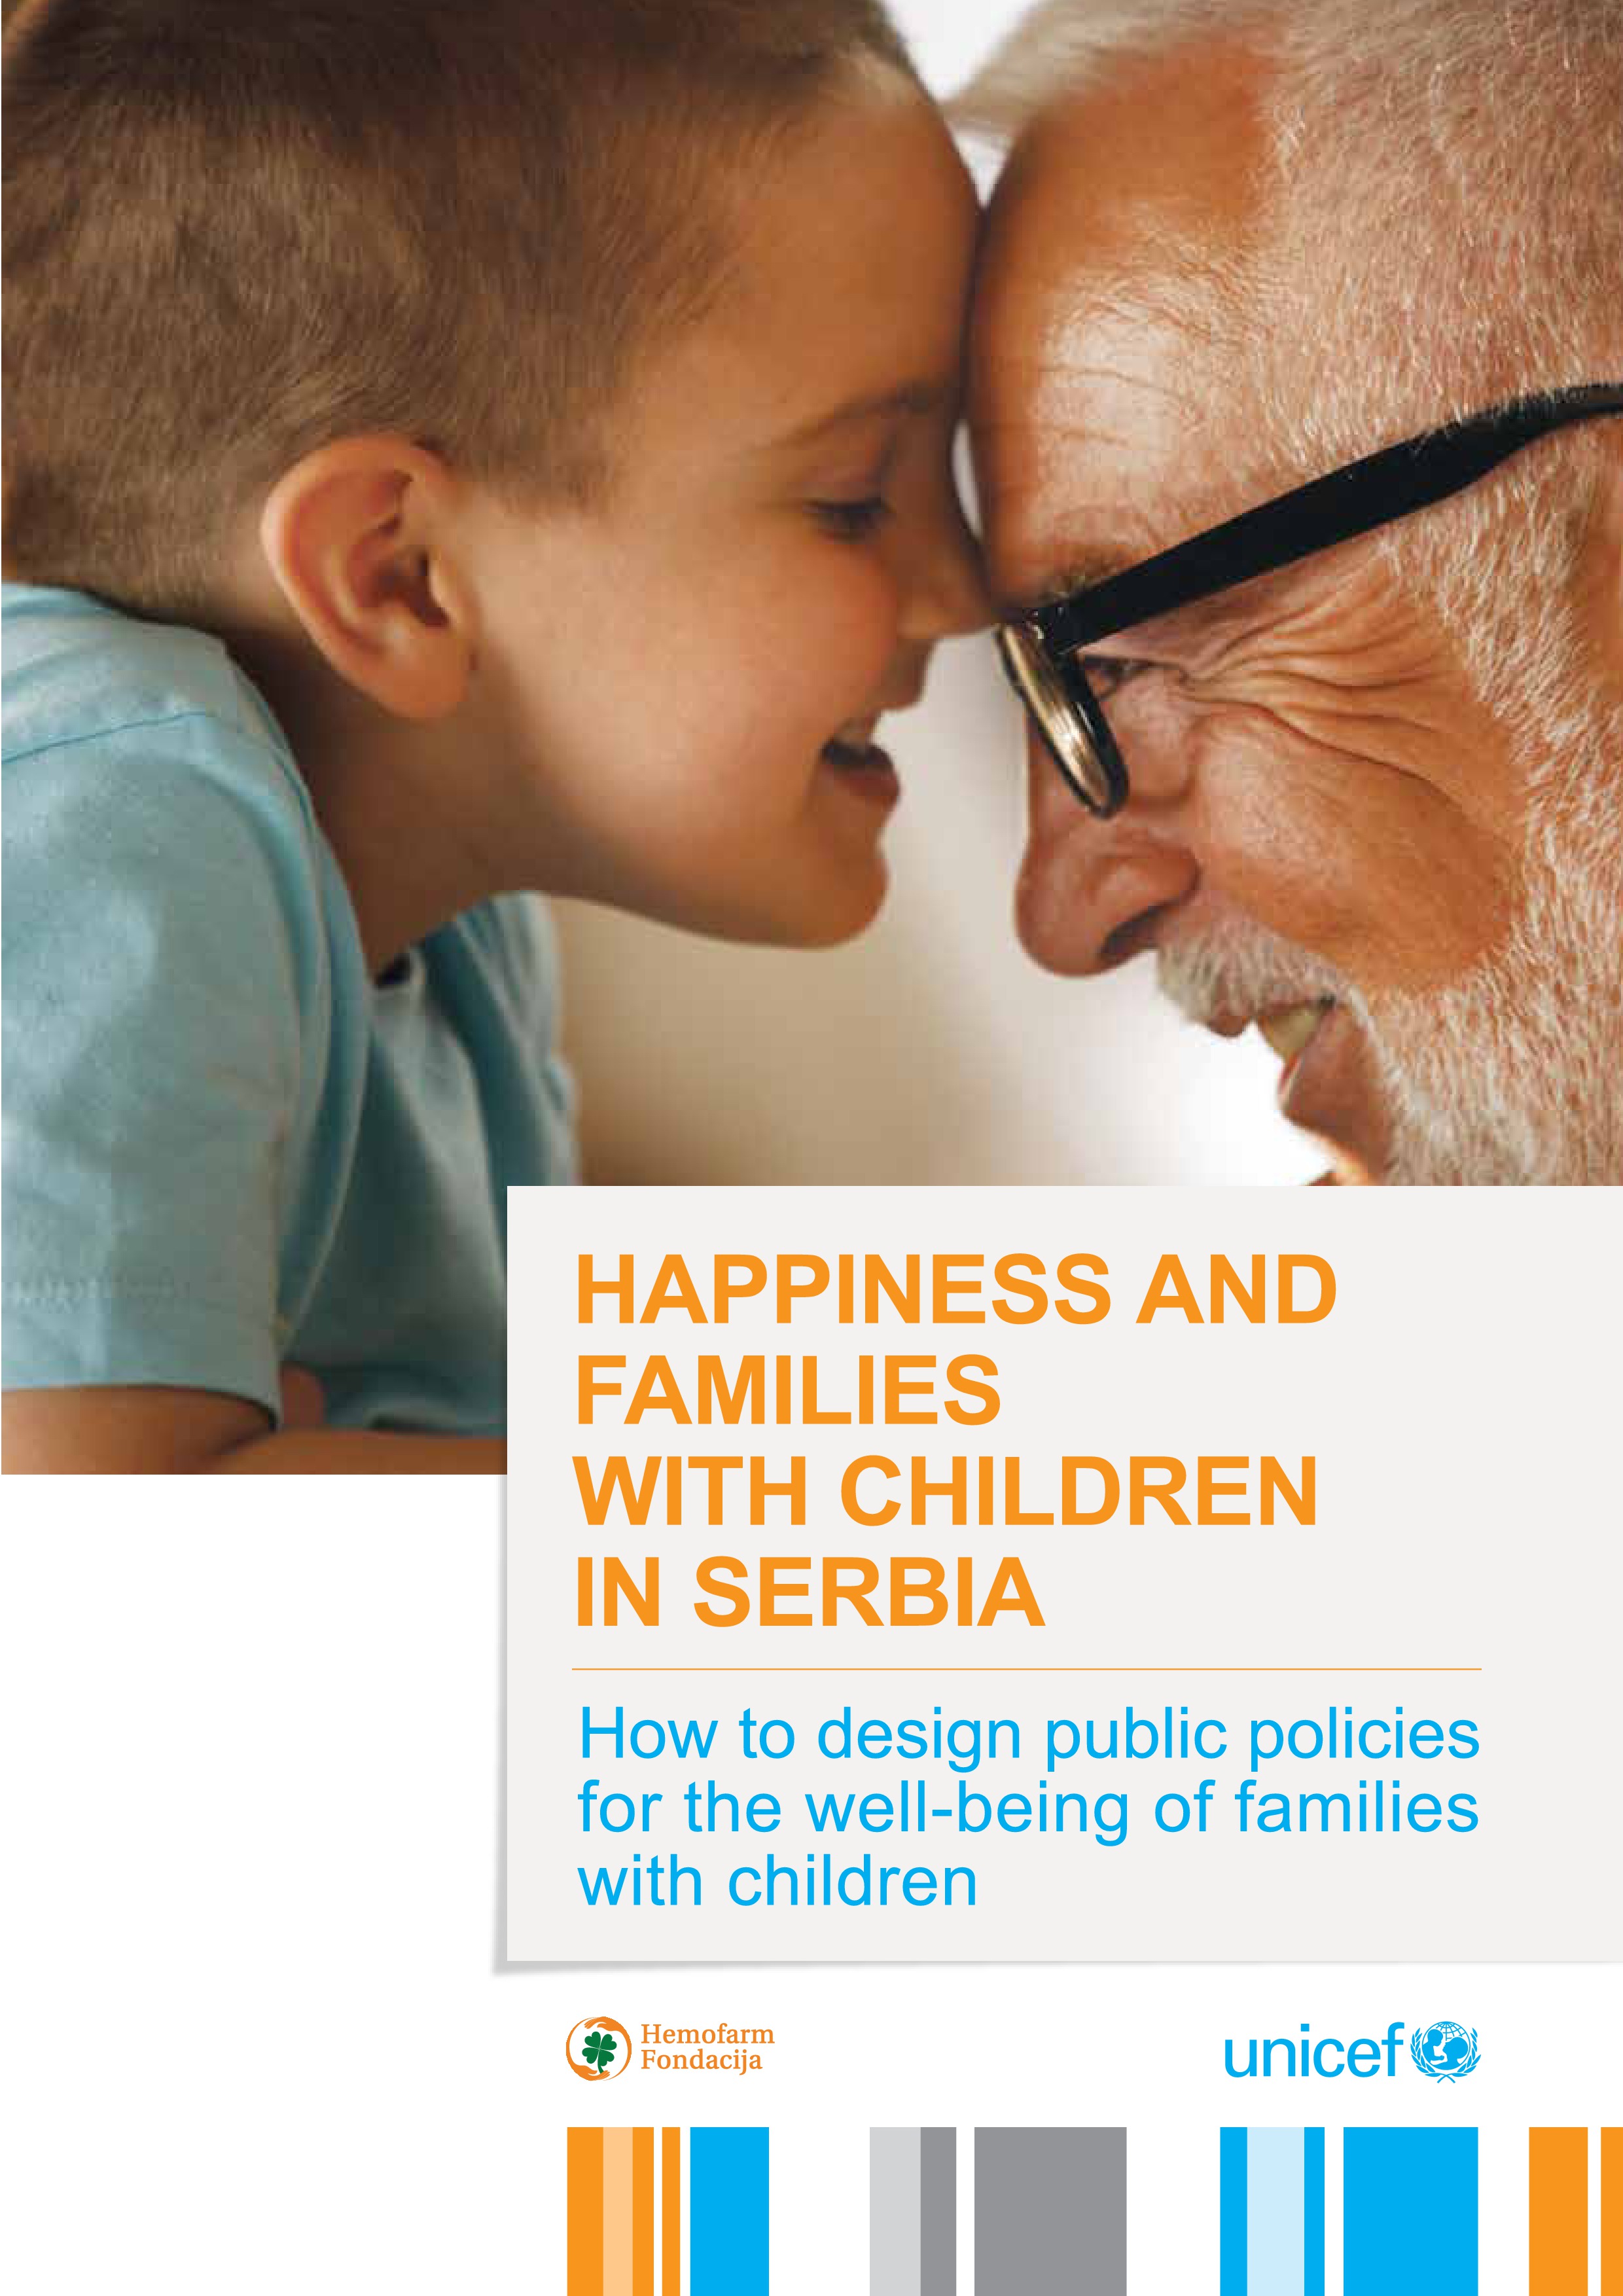 Study “Wellbeing of families with children in Serbia”